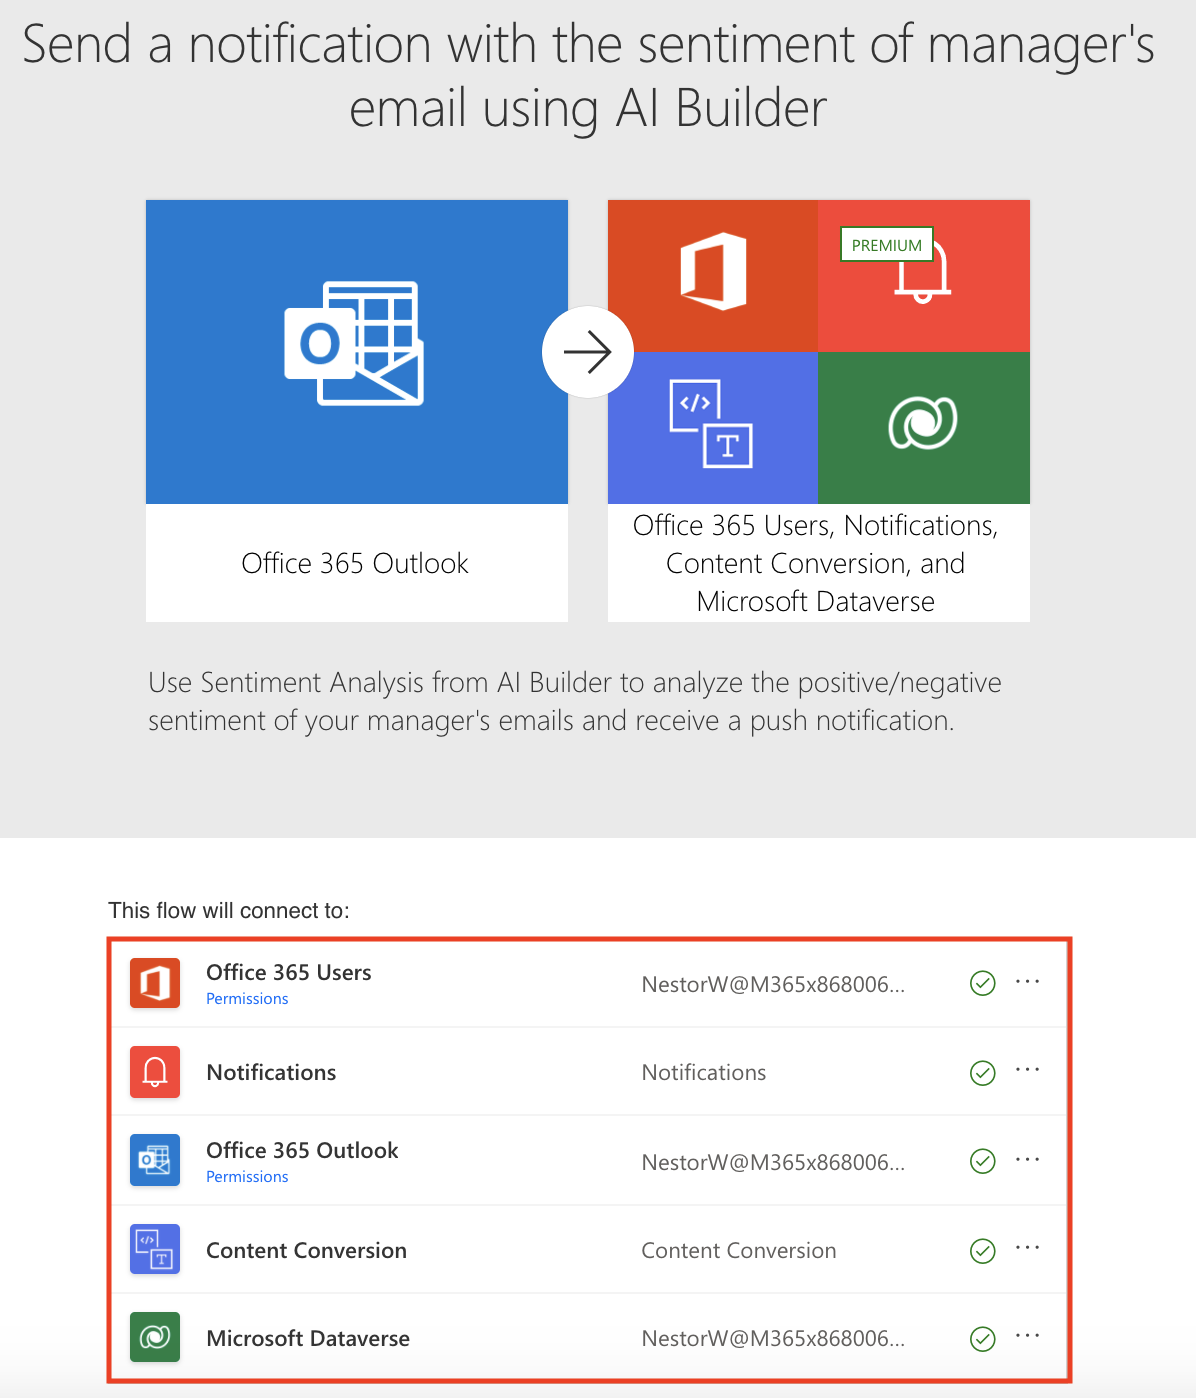 Send a notification with the sentiment of manager's email using A I Builder.